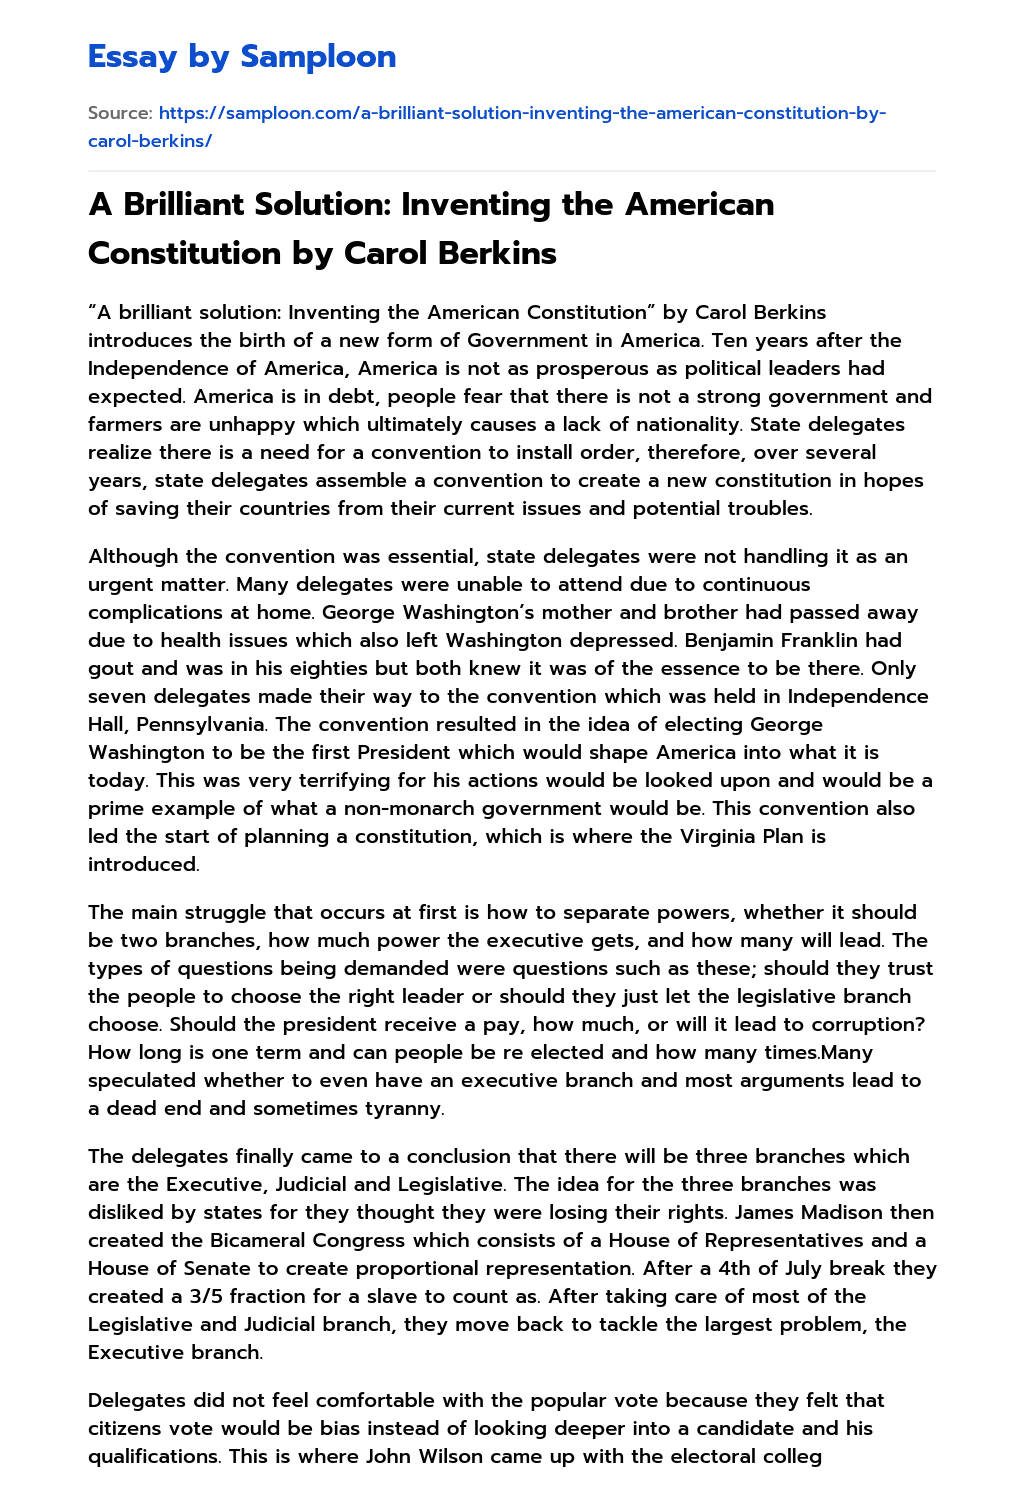 A Brilliant Solution: Inventing the American Constitution by Carol Berkins essay